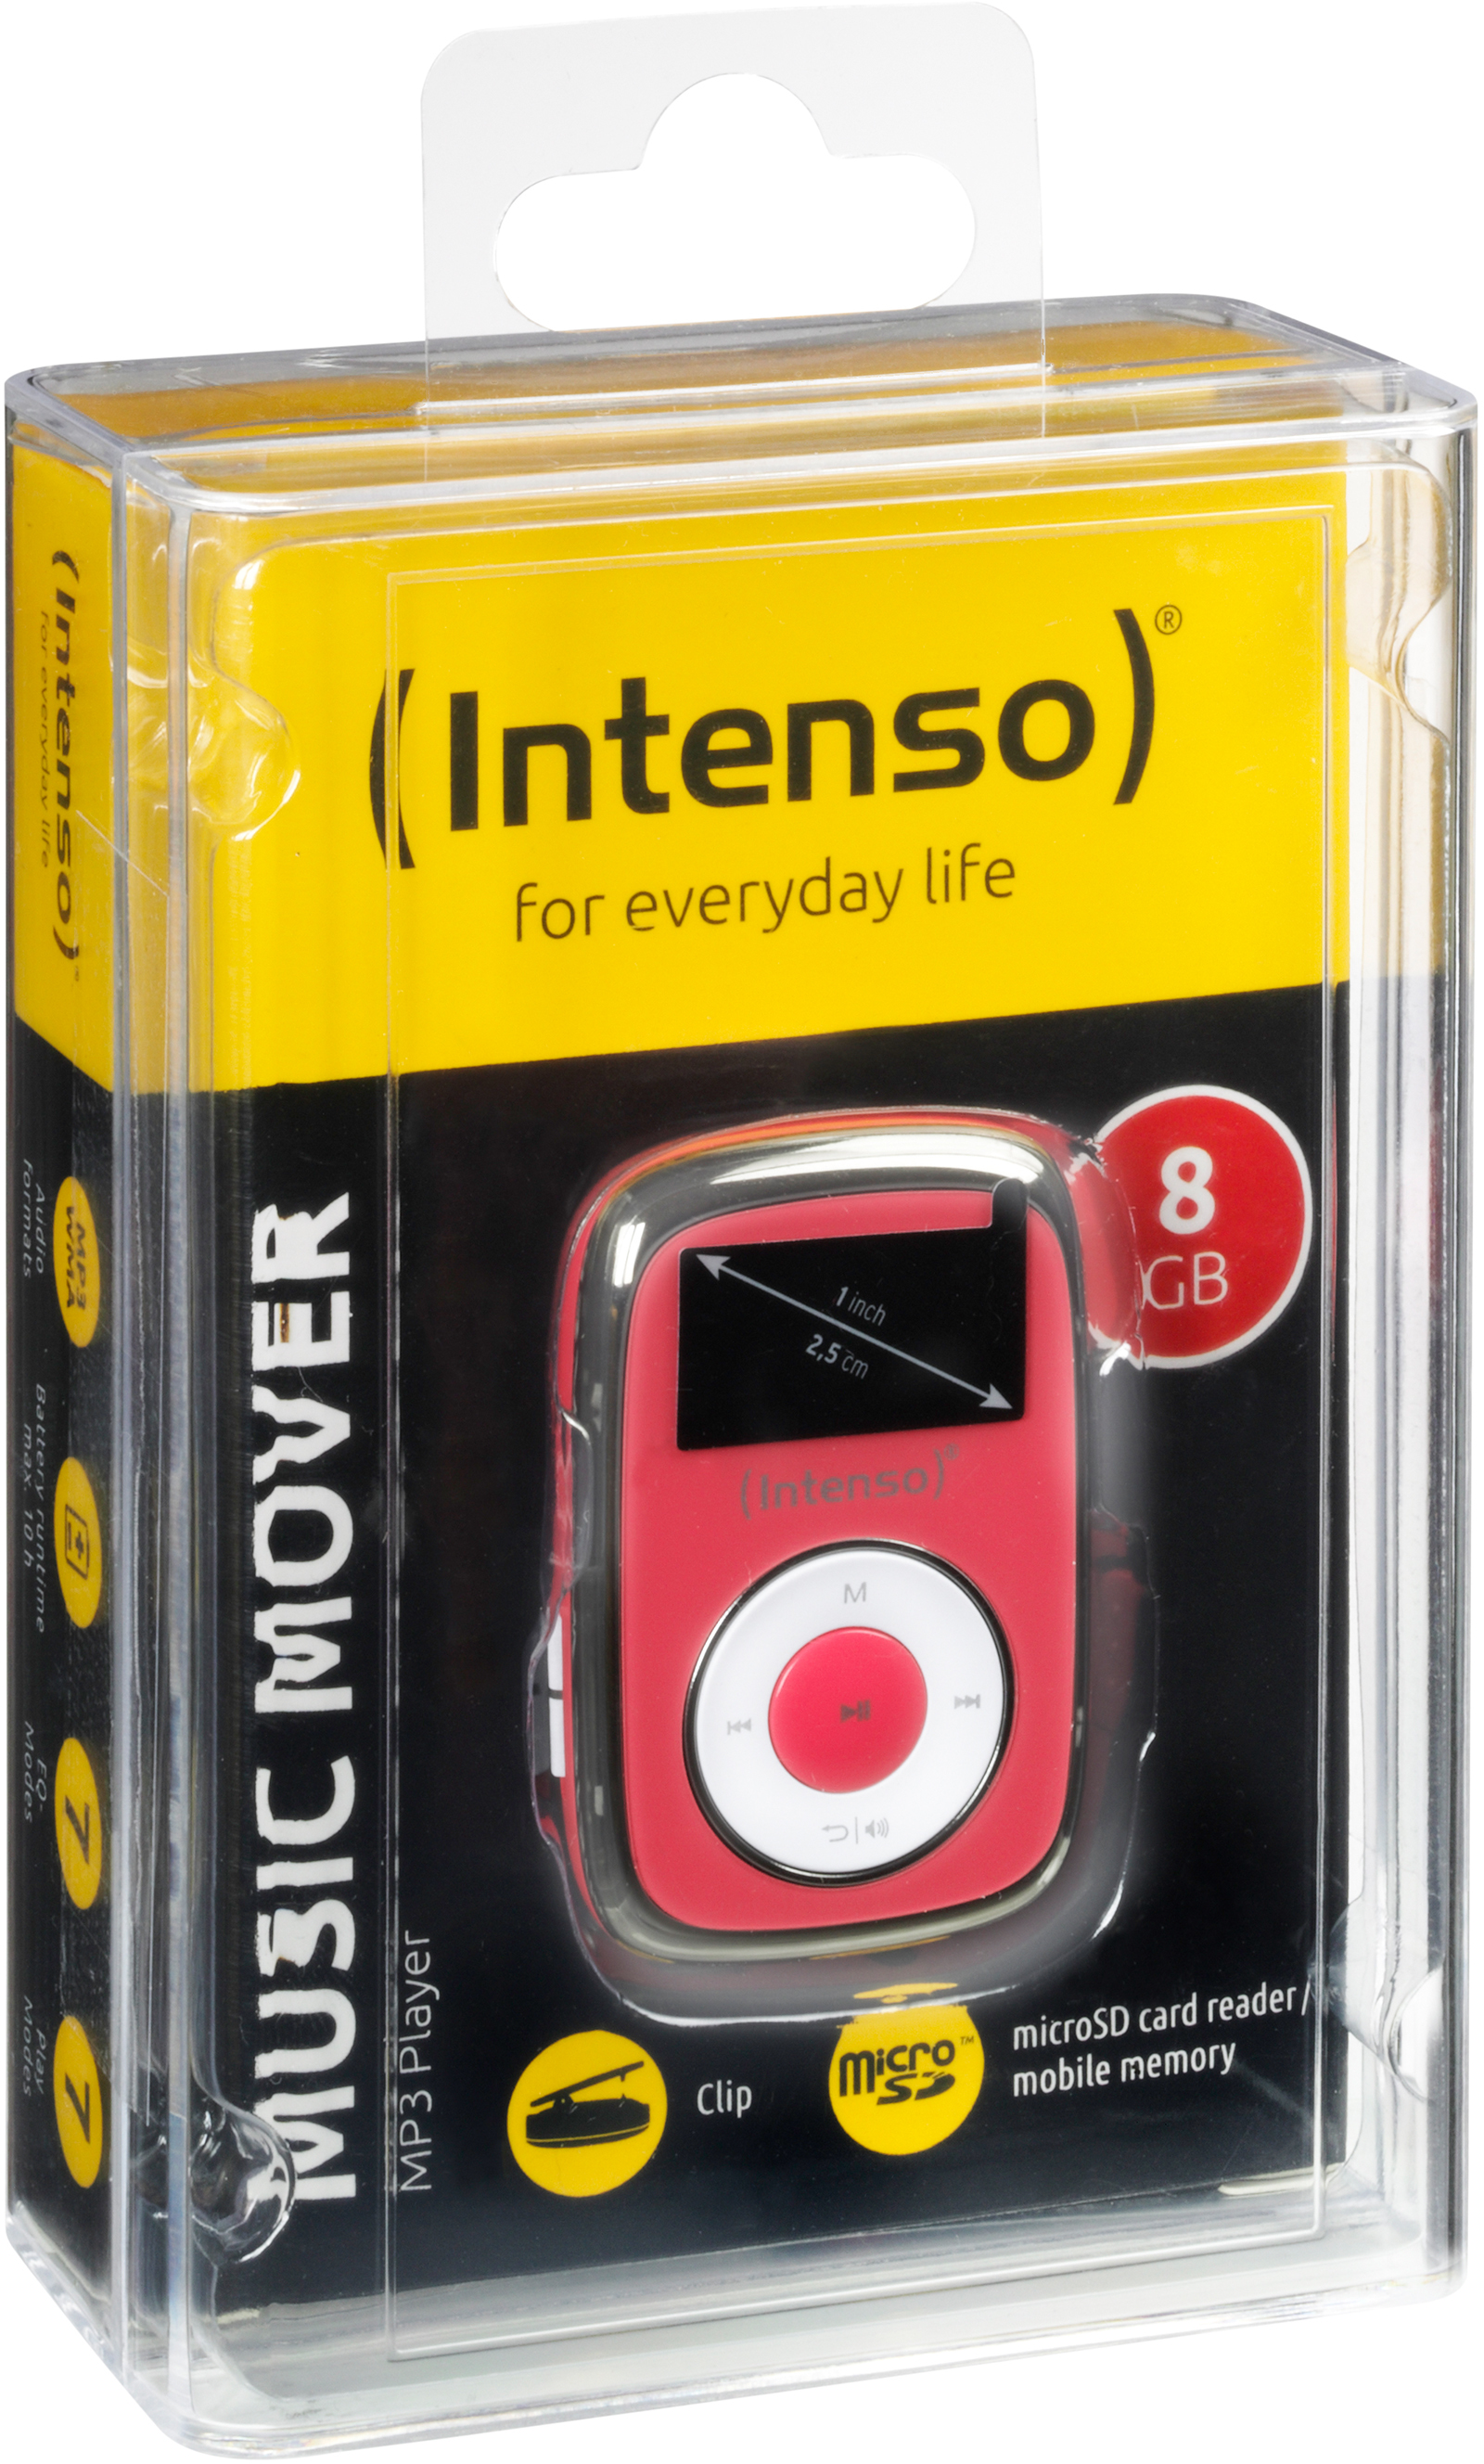 GB, Mp3-Player (8 INTENSO Mover Music Pink)